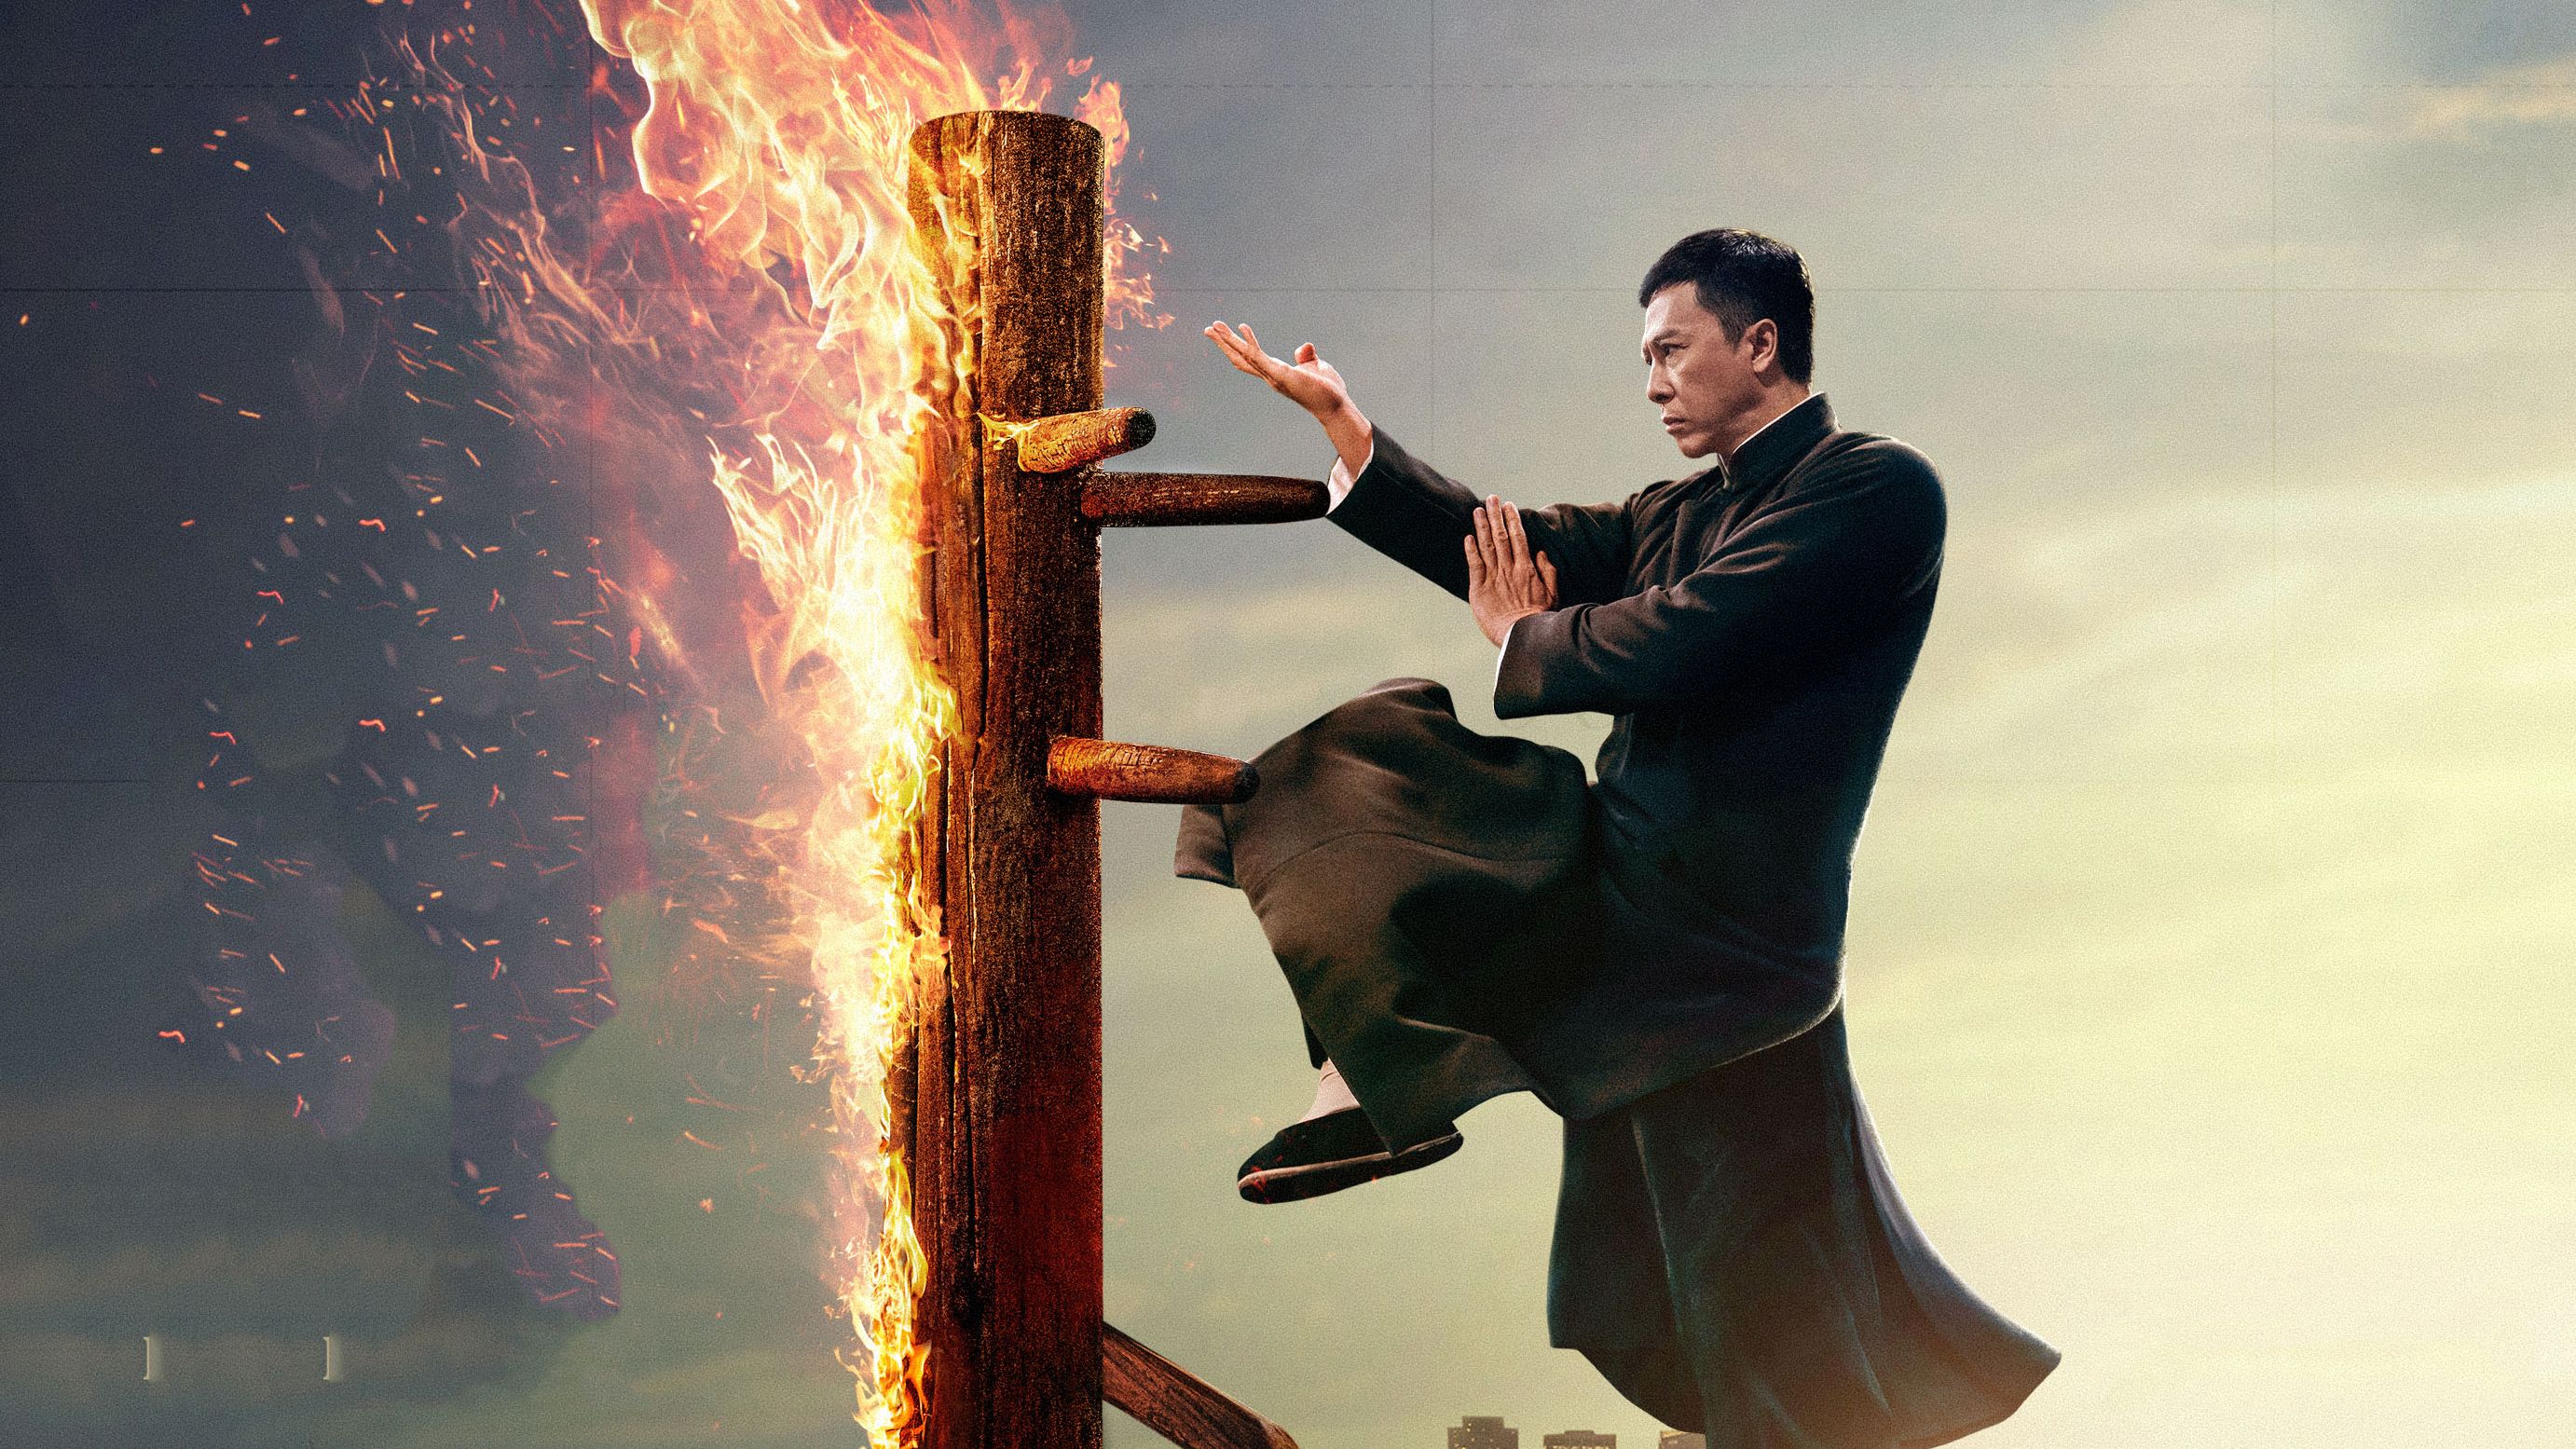 Ip Man 4 The Finale, HD Movies, 4k Wallpapers, Image, Backgrounds, Photos a...